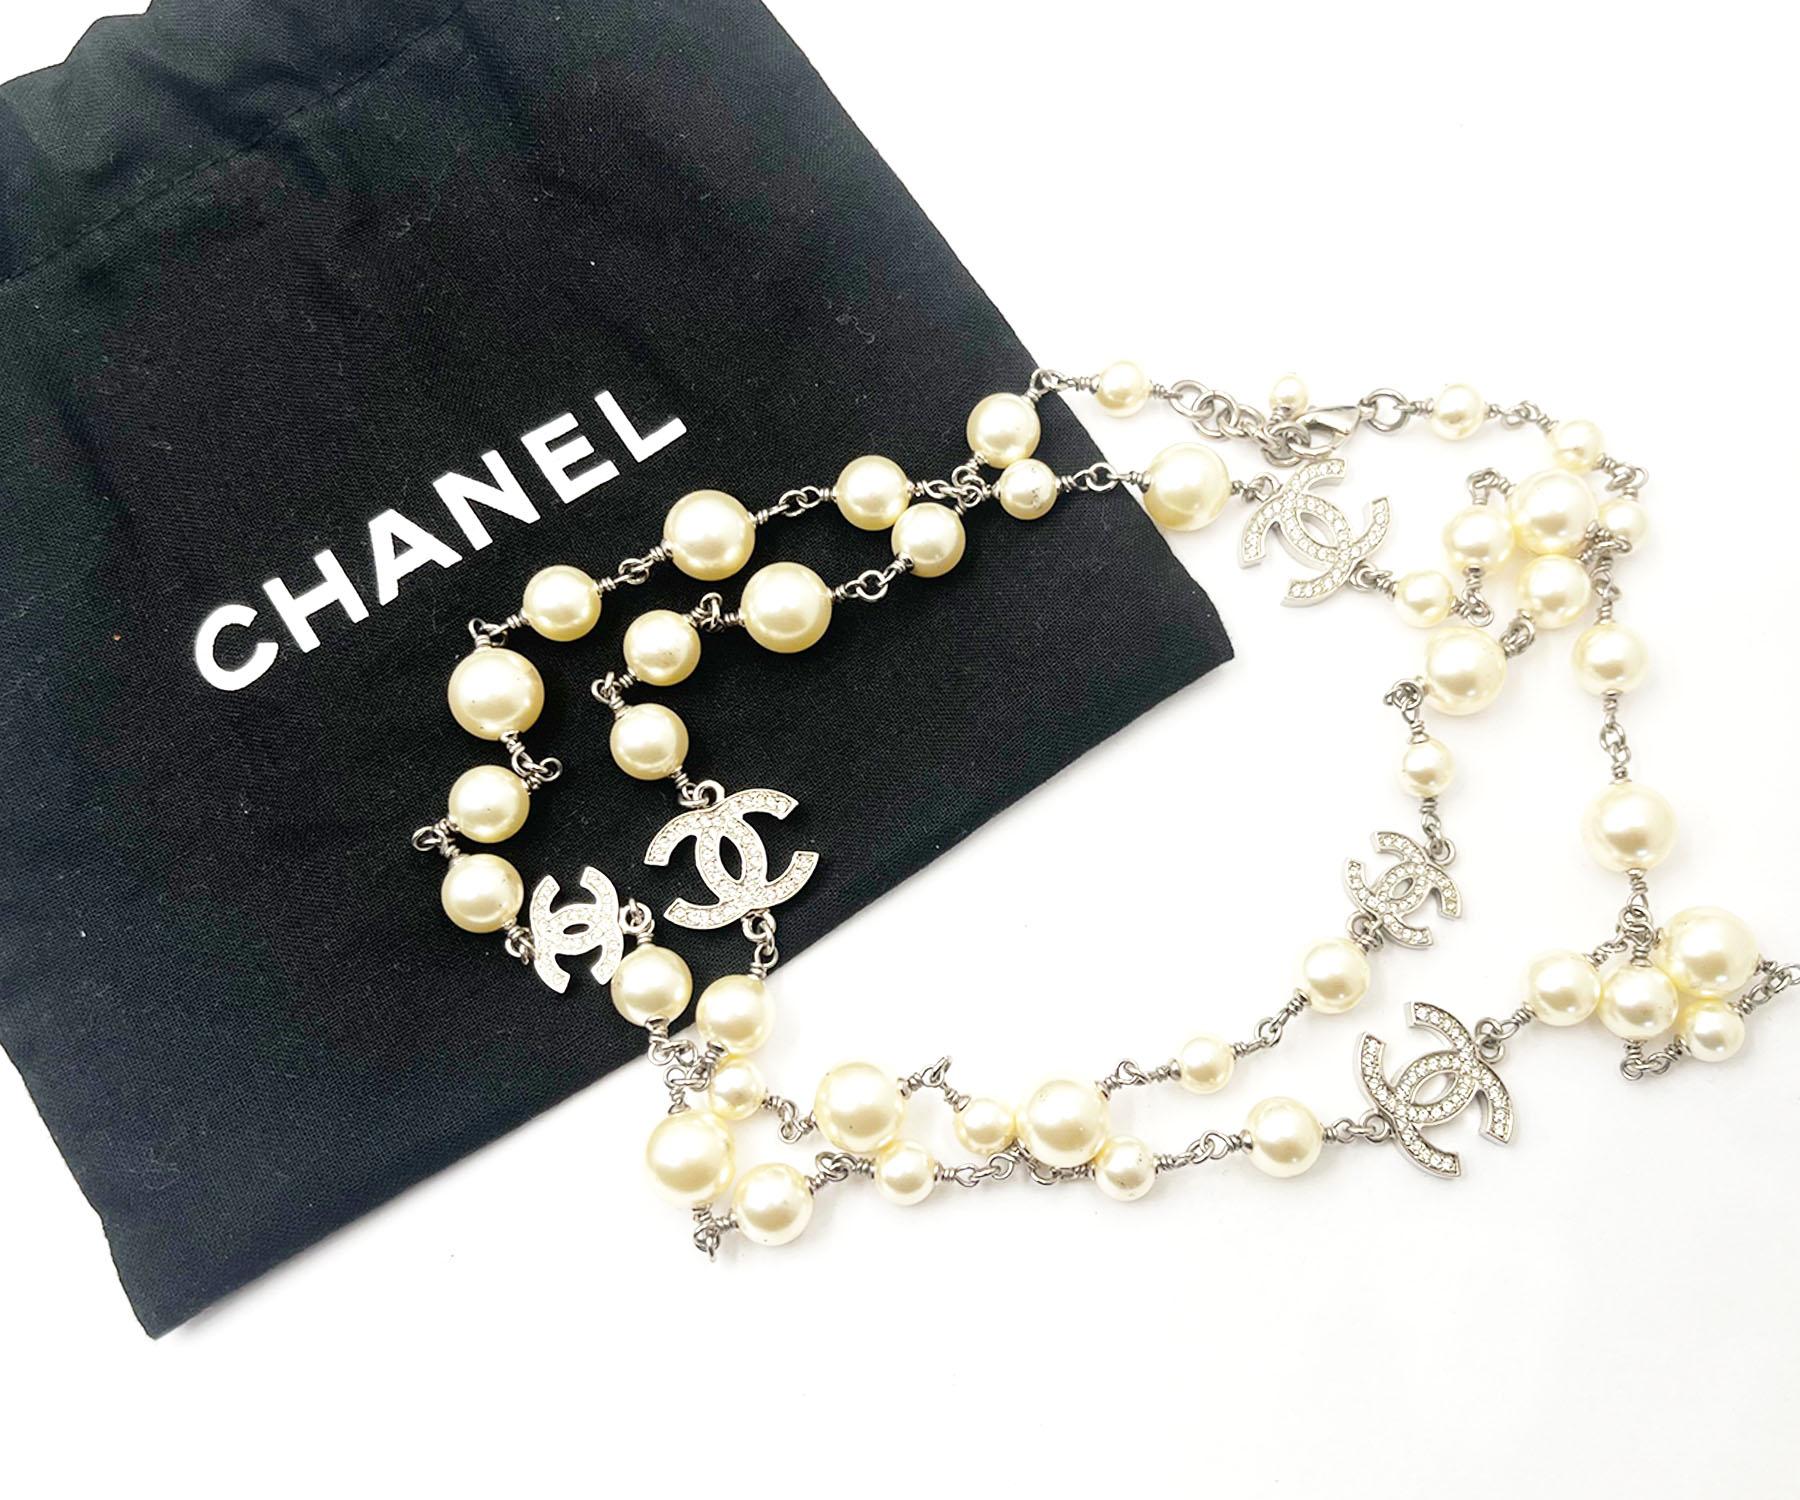 Chanel Classic 5 Silver CC Crystal Faux Pearl Long Necklace In Excellent Condition For Sale In Pasadena, CA